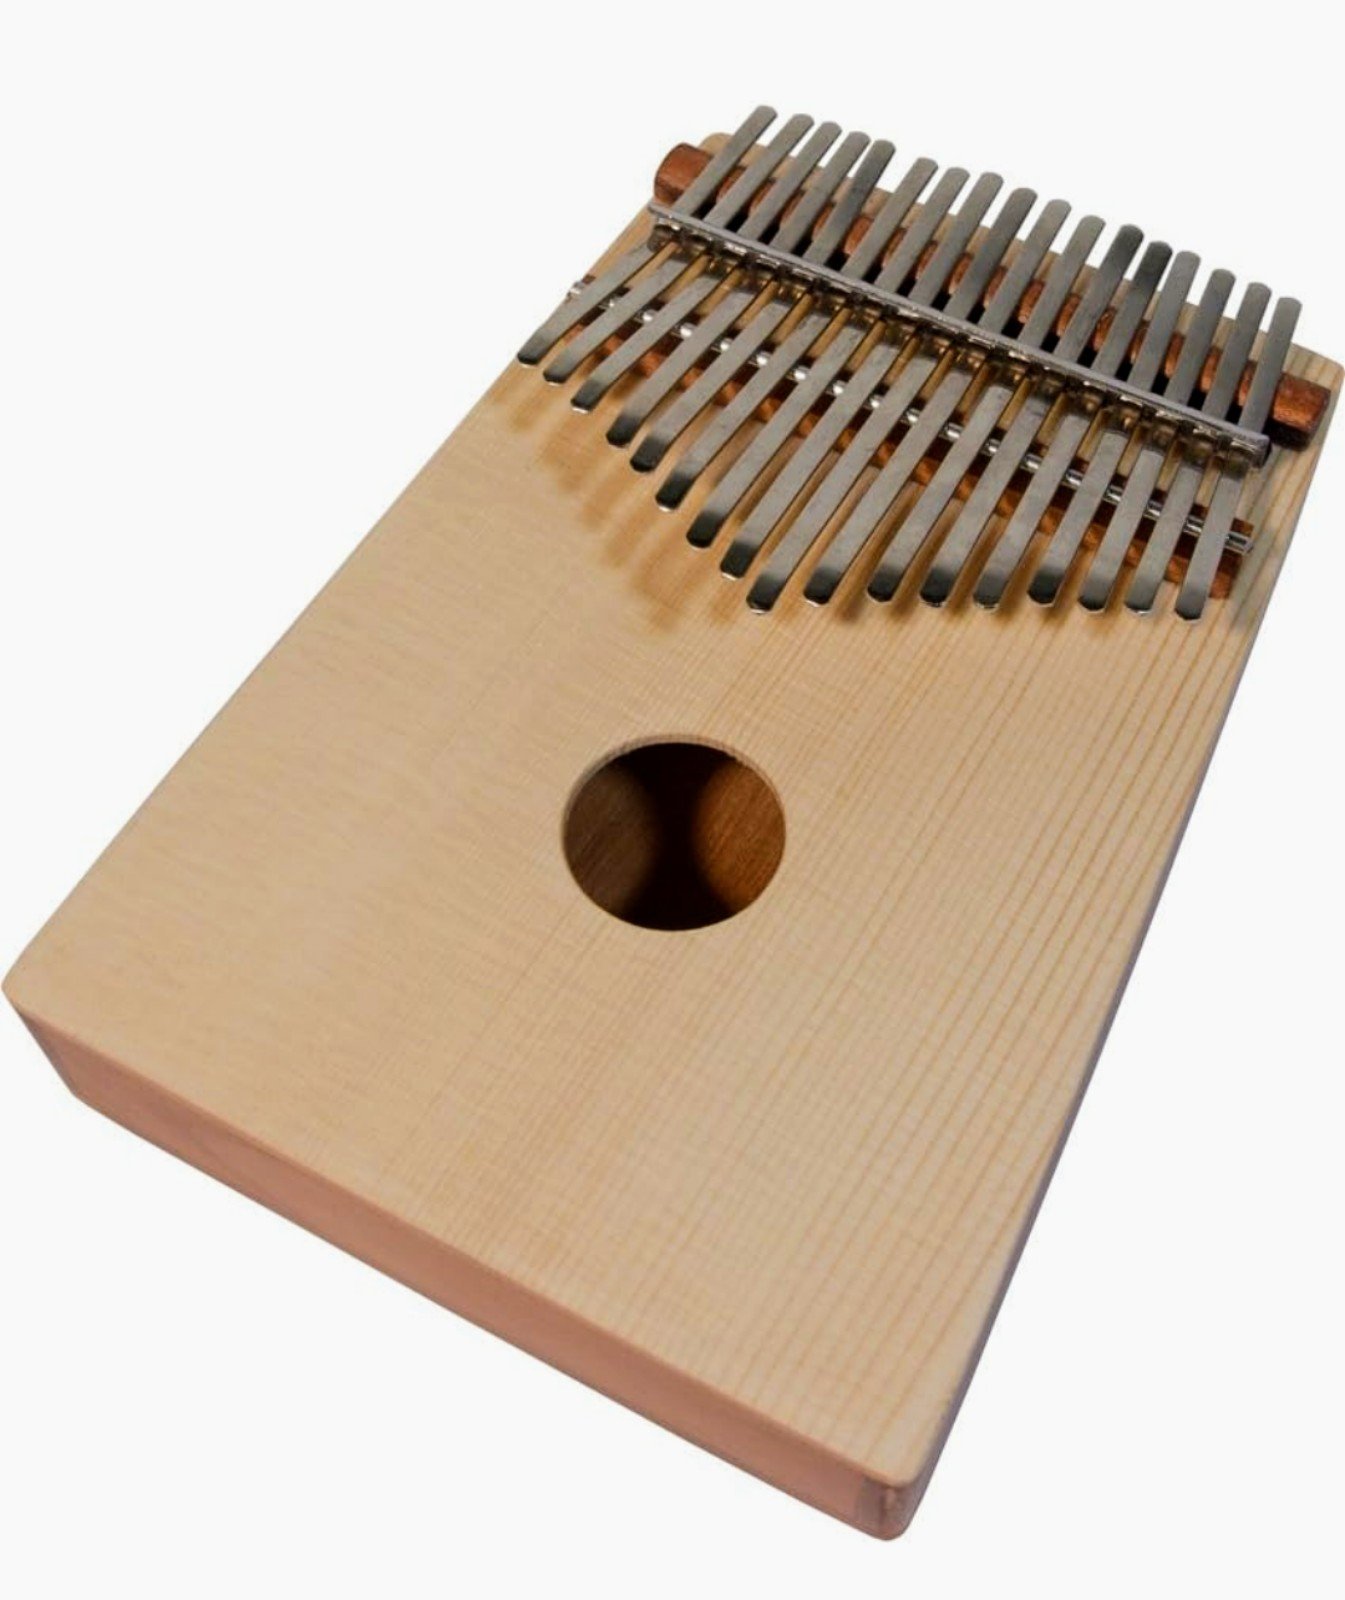 Dobani 17 Key Thumb Piano Kalimba Made With Spruce And Red Cedar QjAFhD0mX